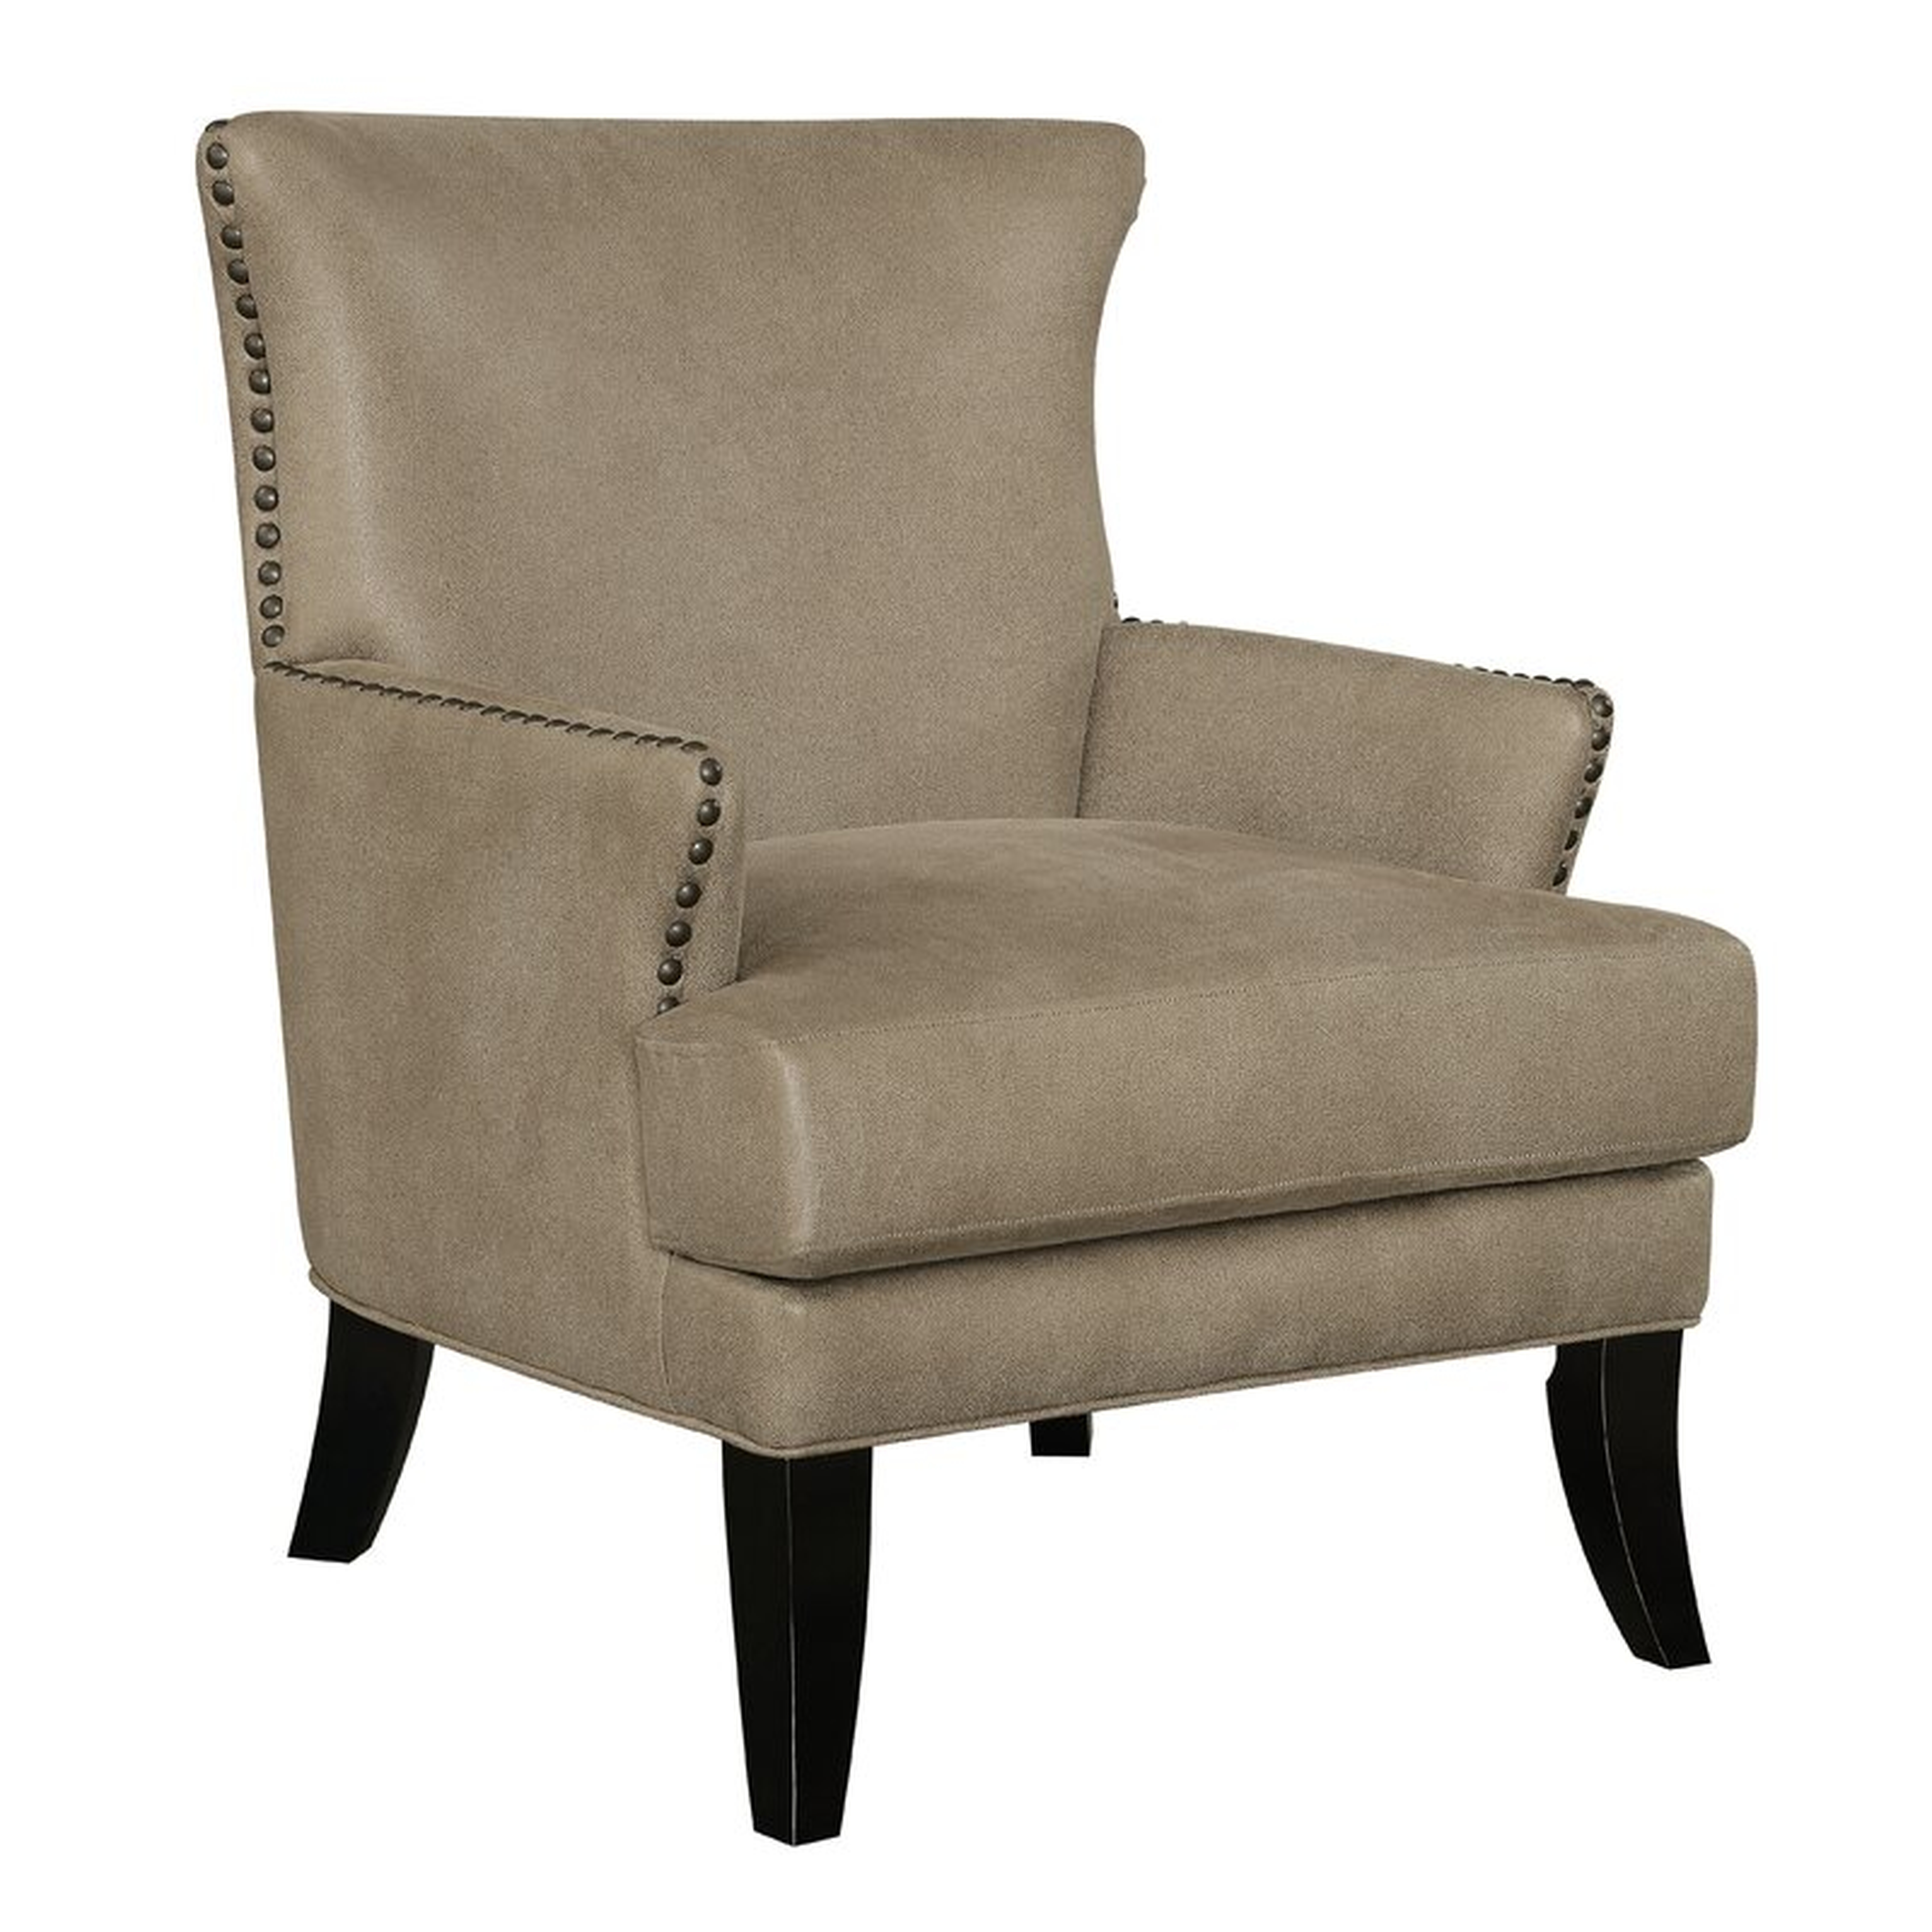 Sirmans 31" Wide Polyester Wingback Chair - Wayfair